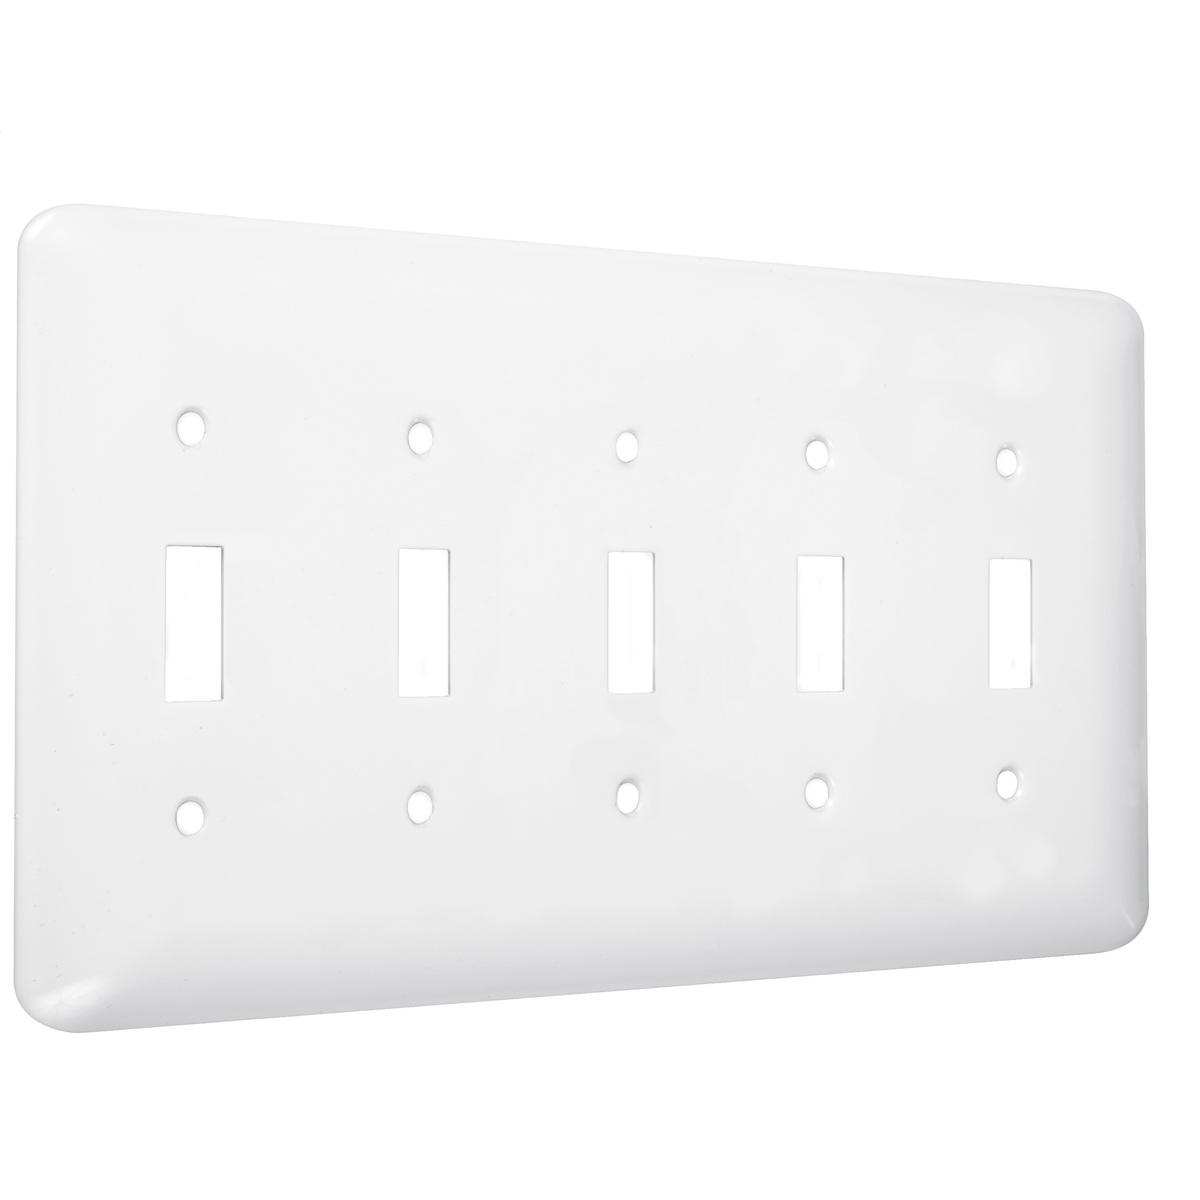 Hubbell WRW-5T 5-Gang Metal Wallplate, Maxi, 5-Toggle, White Smooth  ; Easily primed and painted to match or complement walls. ; Won't bow, crack or distort during installation. ; Premium North American powder coat. ; Includes screw(s) in matching finish.